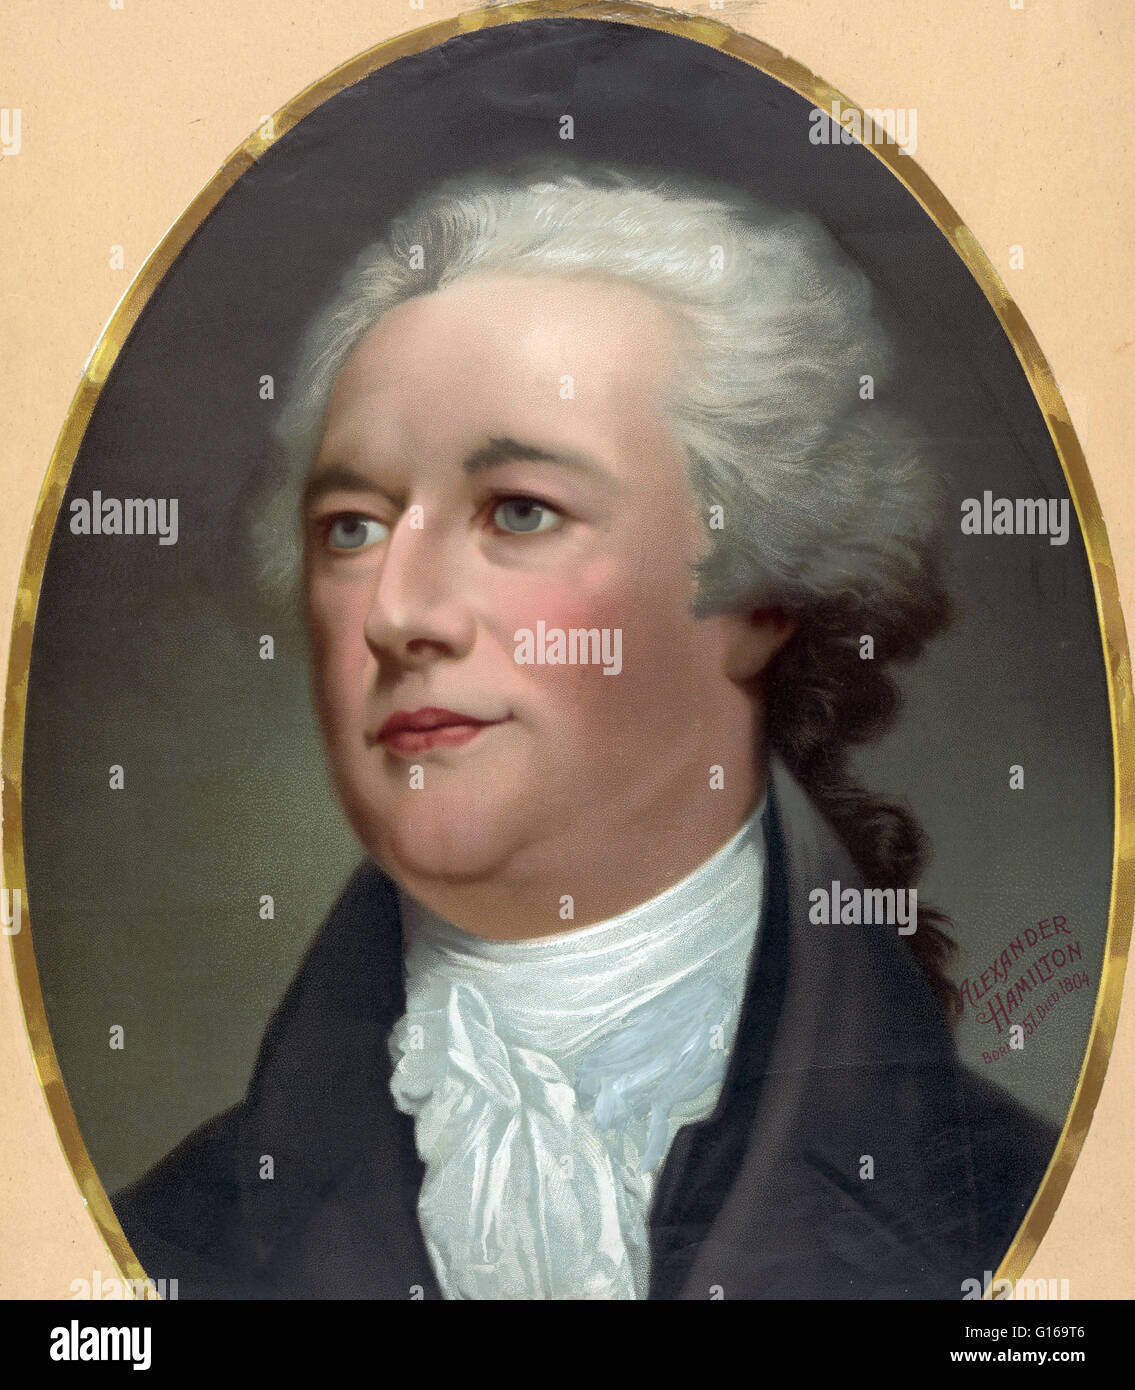 Alexander Hamilton (January 11, 1755 or 1757 - July 12, 1804) was a Founding Father of the United States and one of the most influential interpreters and promoters of the Constitution. Born out of wedlock and raised in the West Indies, he was orphaned at Stock Photo